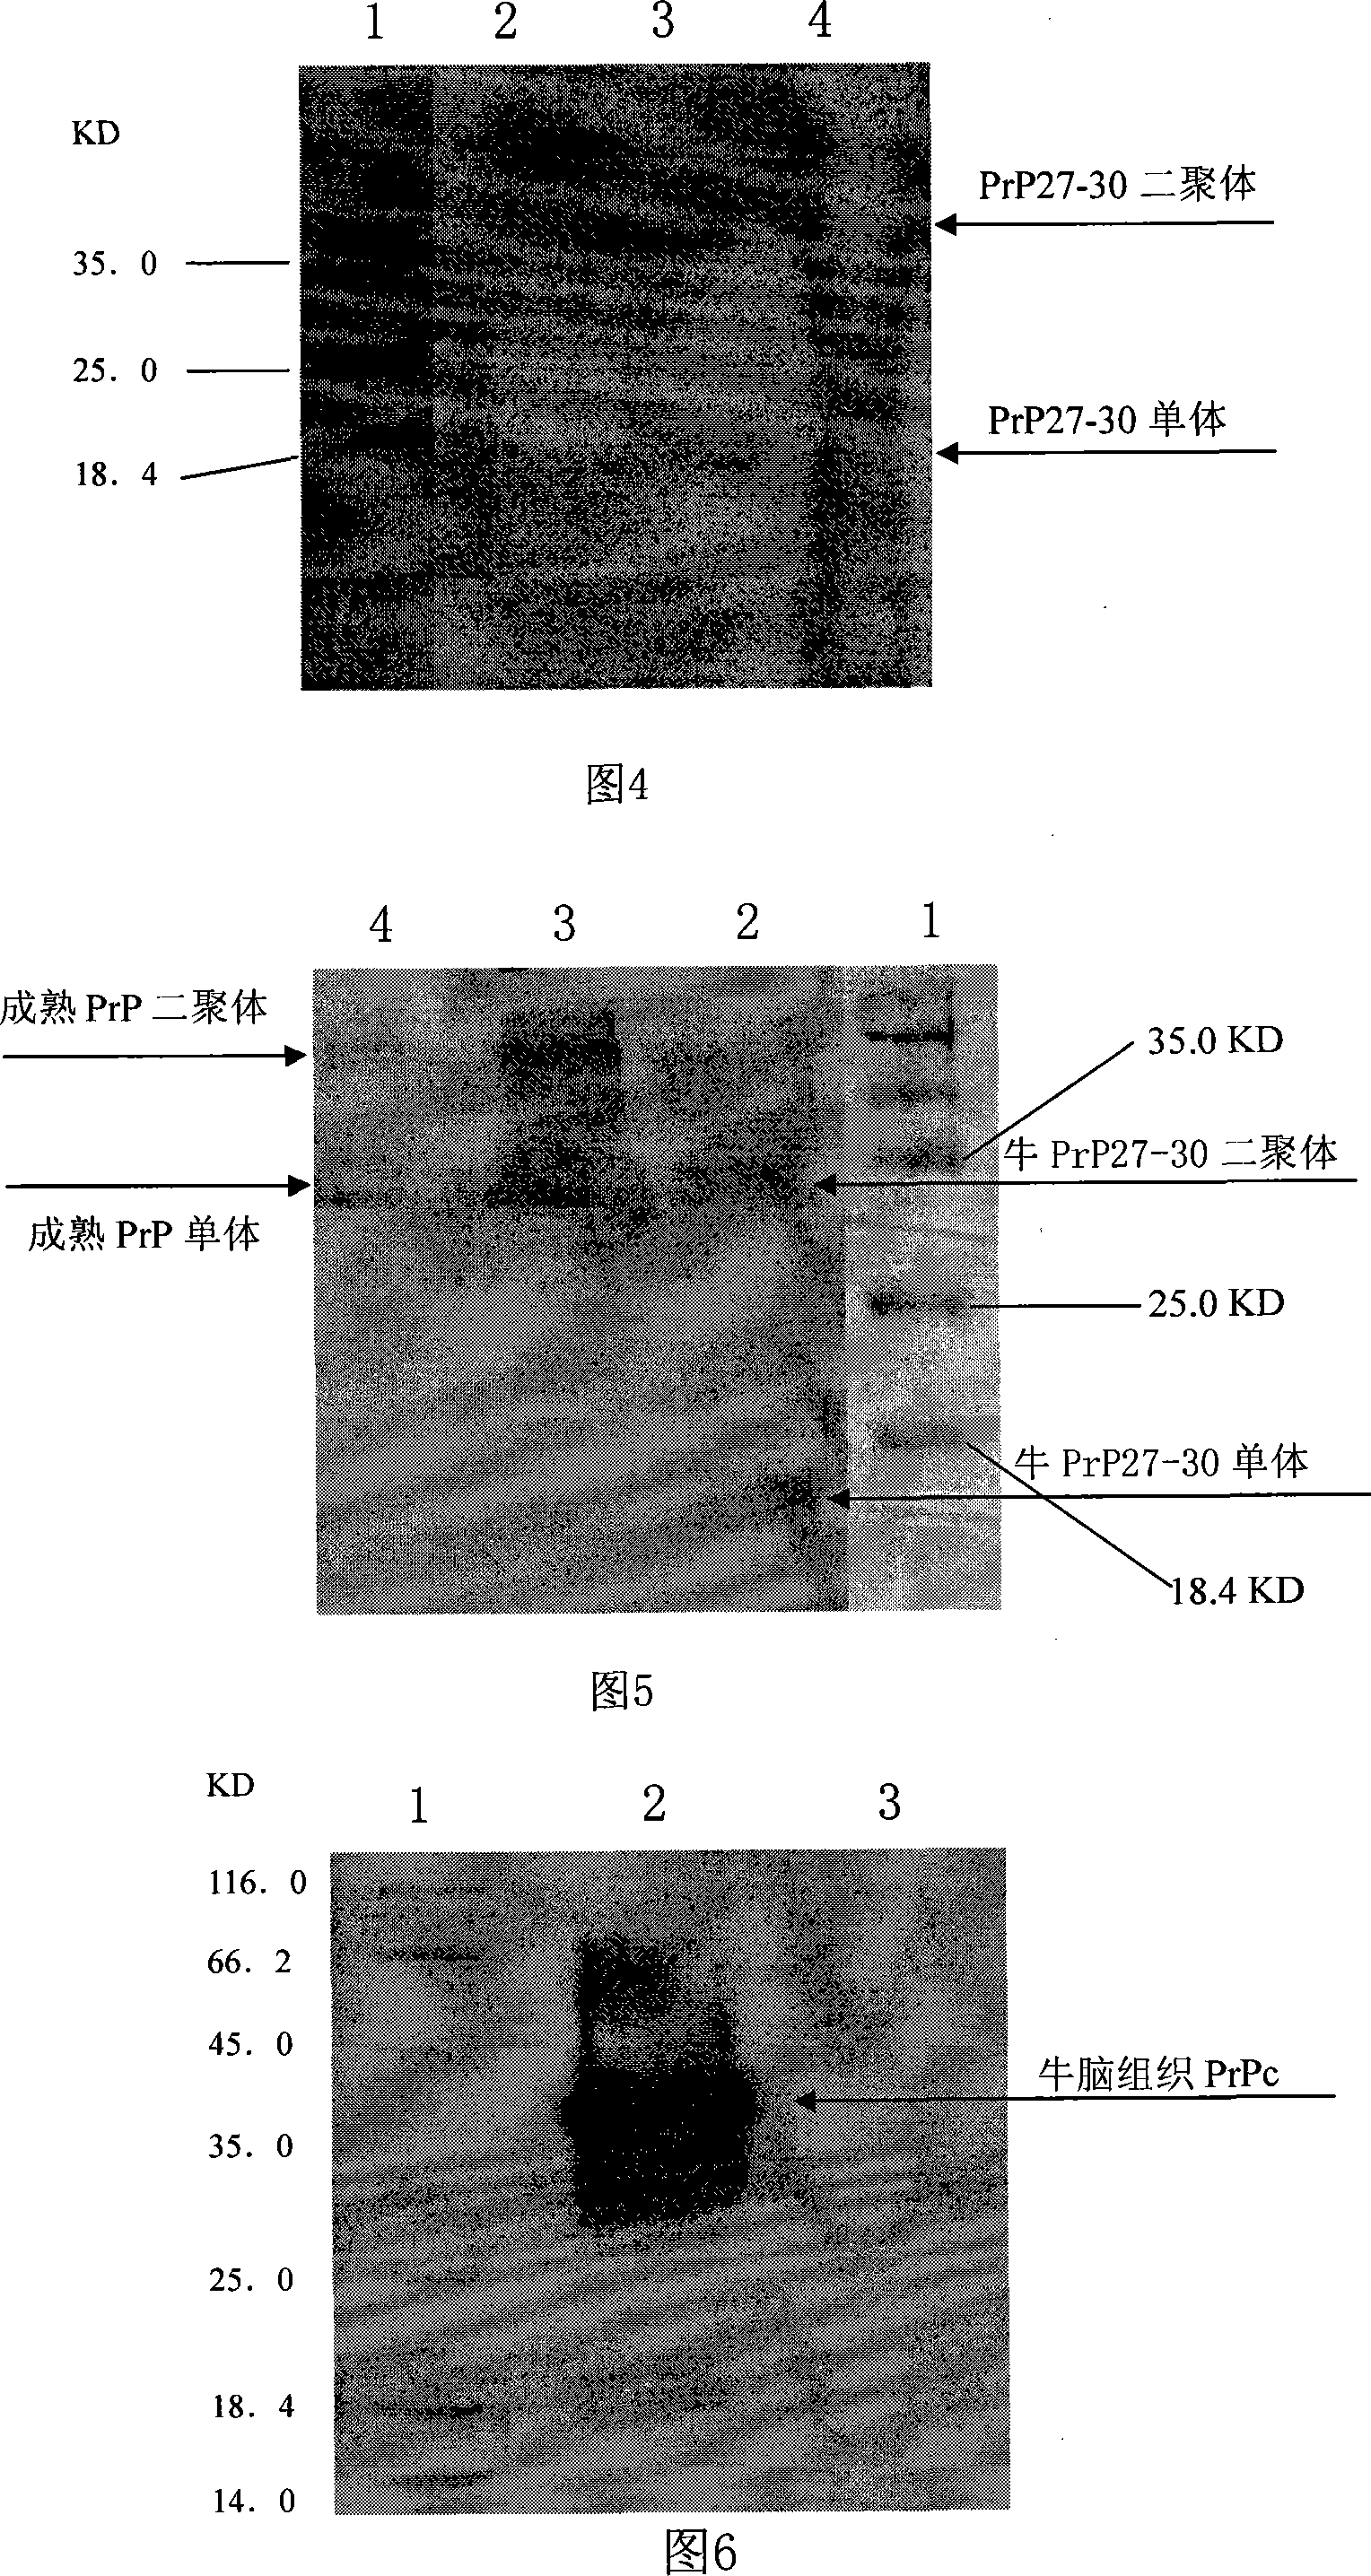 Monoclonal antibody for resisting bovine prion protein and application thereof